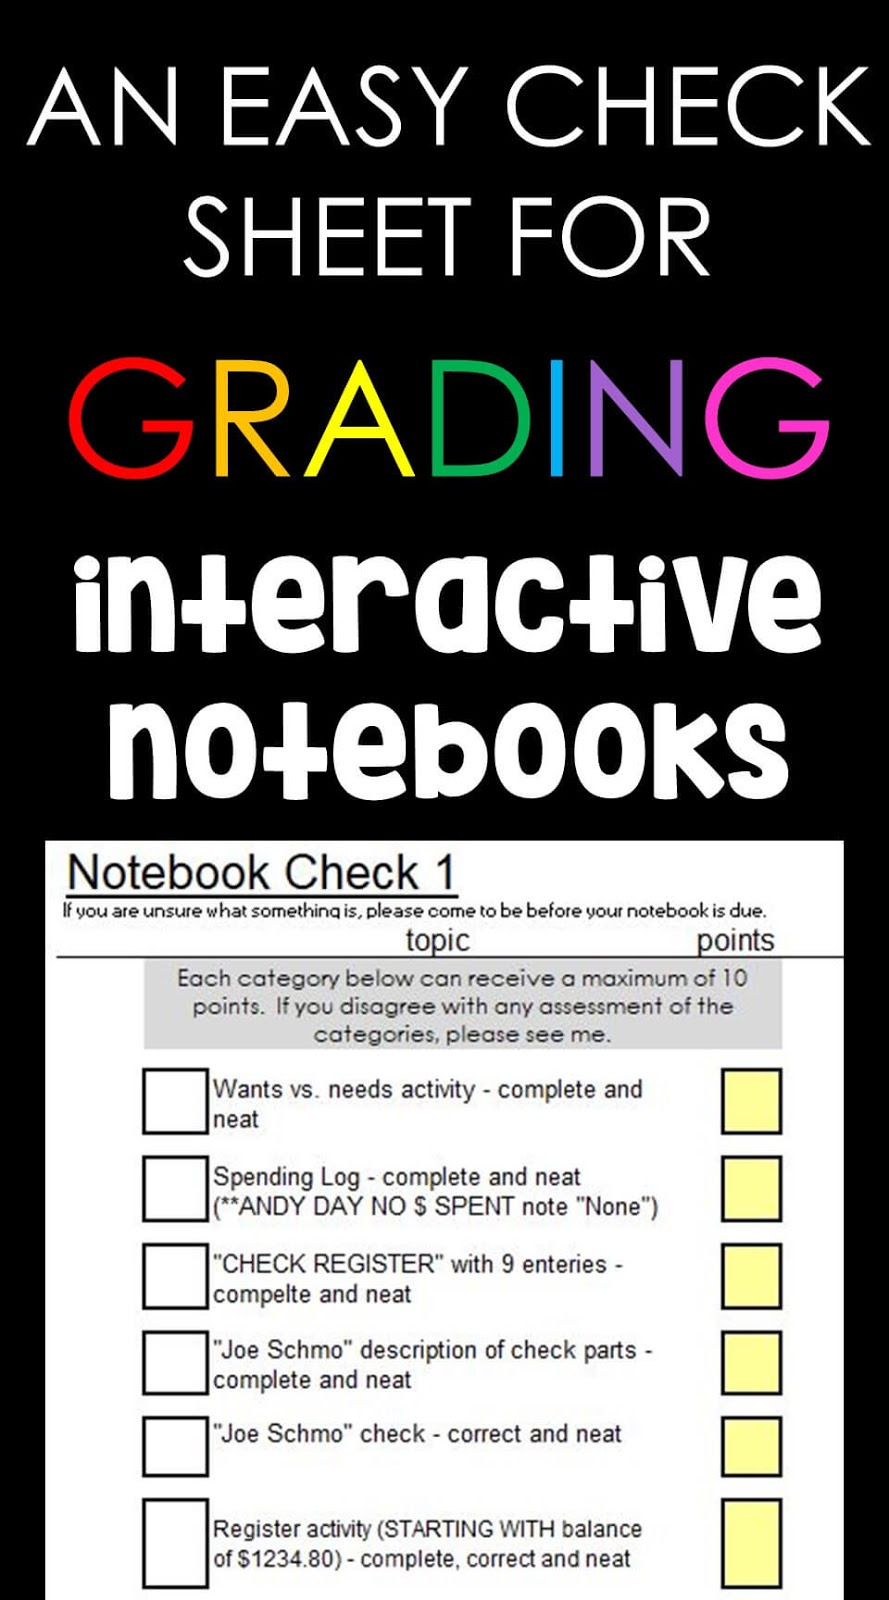 moden Forsøg Kridt Scaffolded Math and Science: An easy check sheet for grading interactive  notebooks